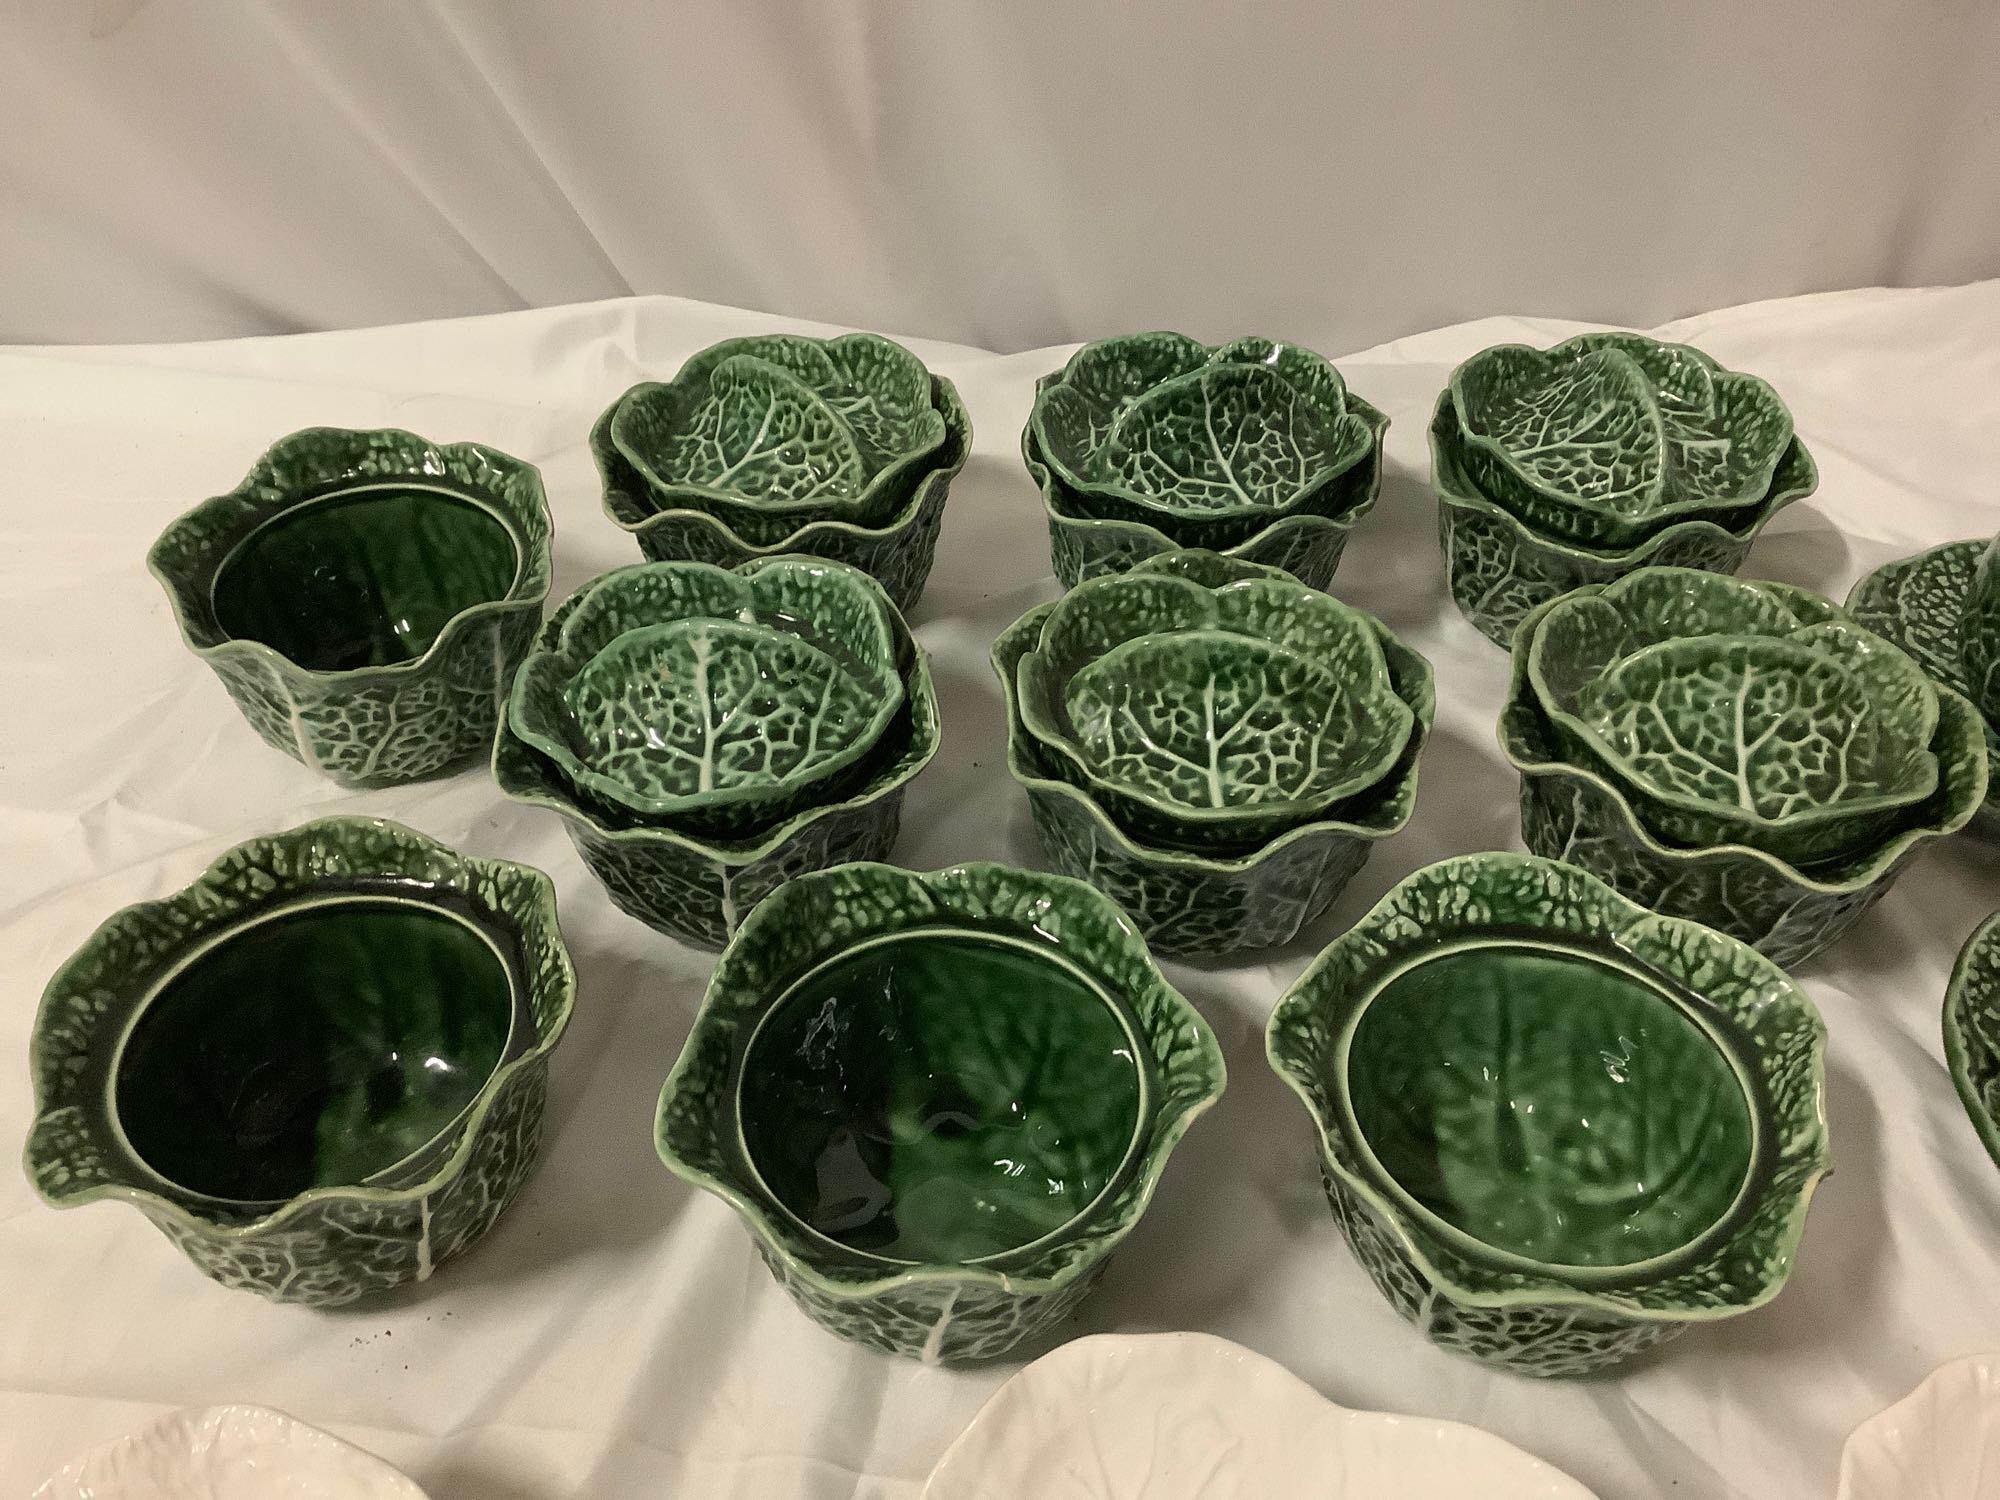 43 pc. Vintage cabbage ceramic tableware from Portugal; bowls, plates, cup & saucer, cabbage leaf